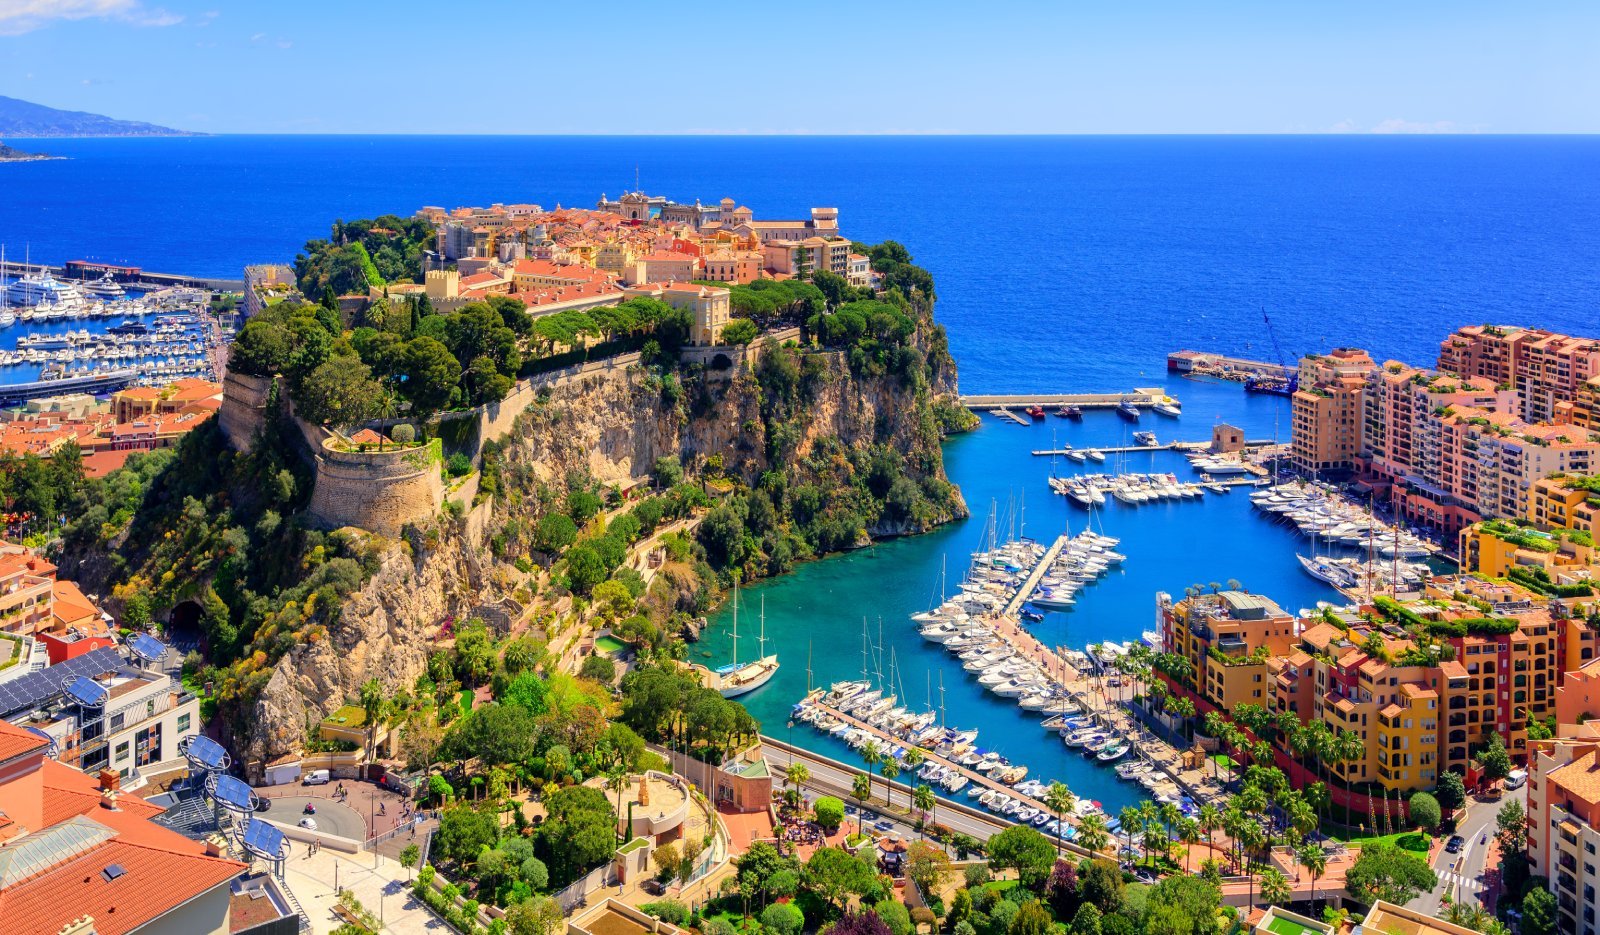 <p class="wp-caption-text">Image Credit: Shutterstock / Boris Stroujko</p>  <p>Topping our list, Monaco, with its unmatched life expectancy of over 89 years, benefits from unparalleled wealth, leading healthcare, a Mediterranean diet, and an active, stress-free lifestyle. It’s not just the opulence but the quality of life that sets Monaco apart.</p>